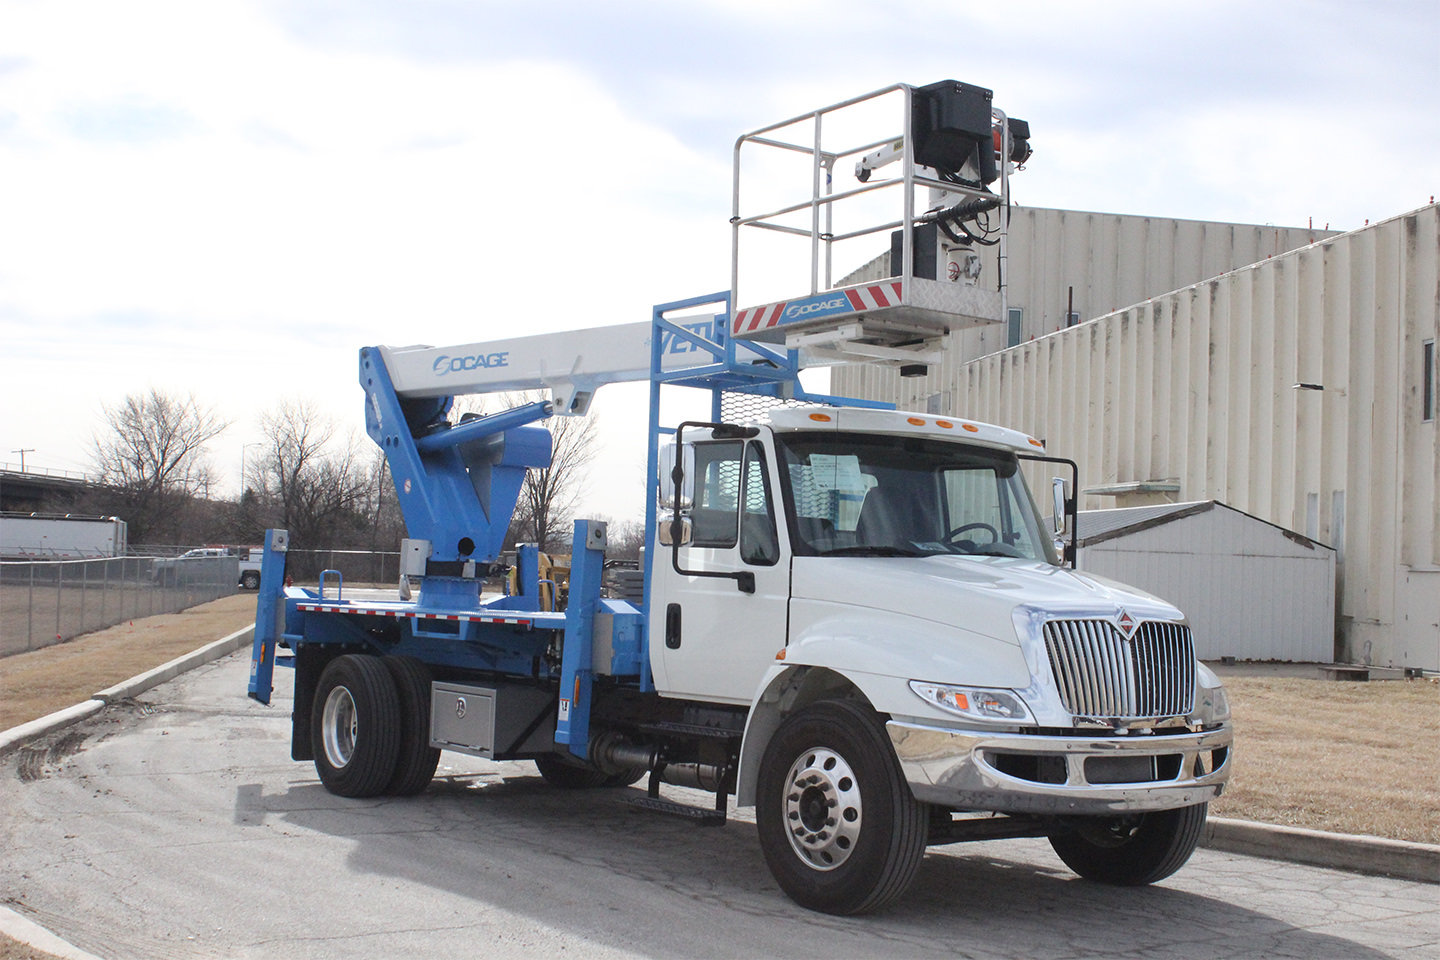 New Socage 72TW aerial lift for sale on International 4300SBA chassis Front